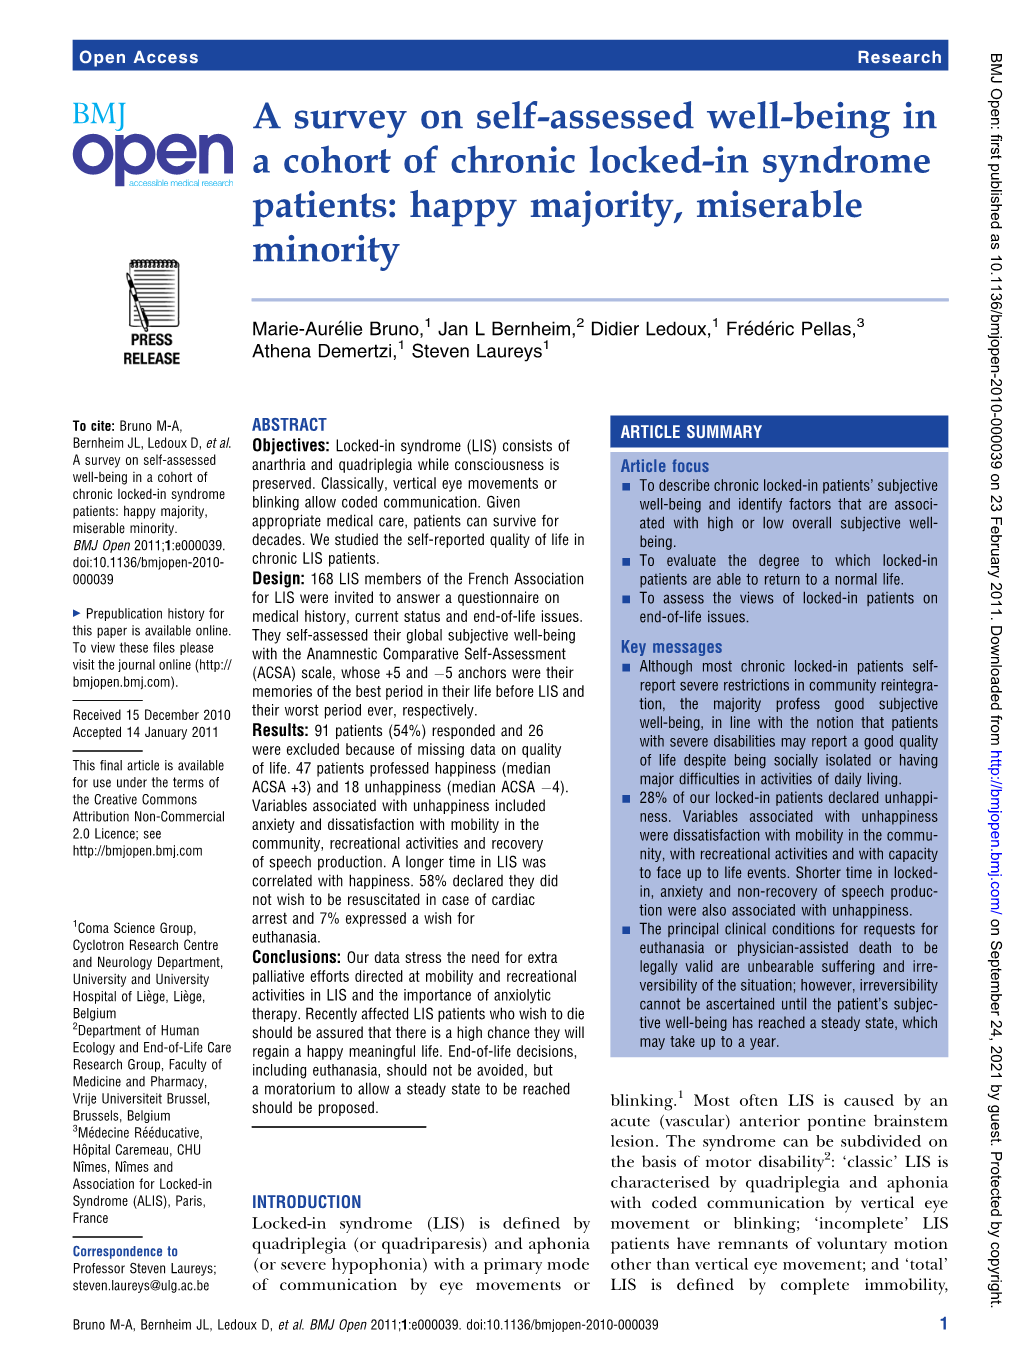 A Survey on Self-Assessed Well-Being in a Cohort of Chronic Locked-In Syndrome Patients: Happy Majority, Miserable Minority